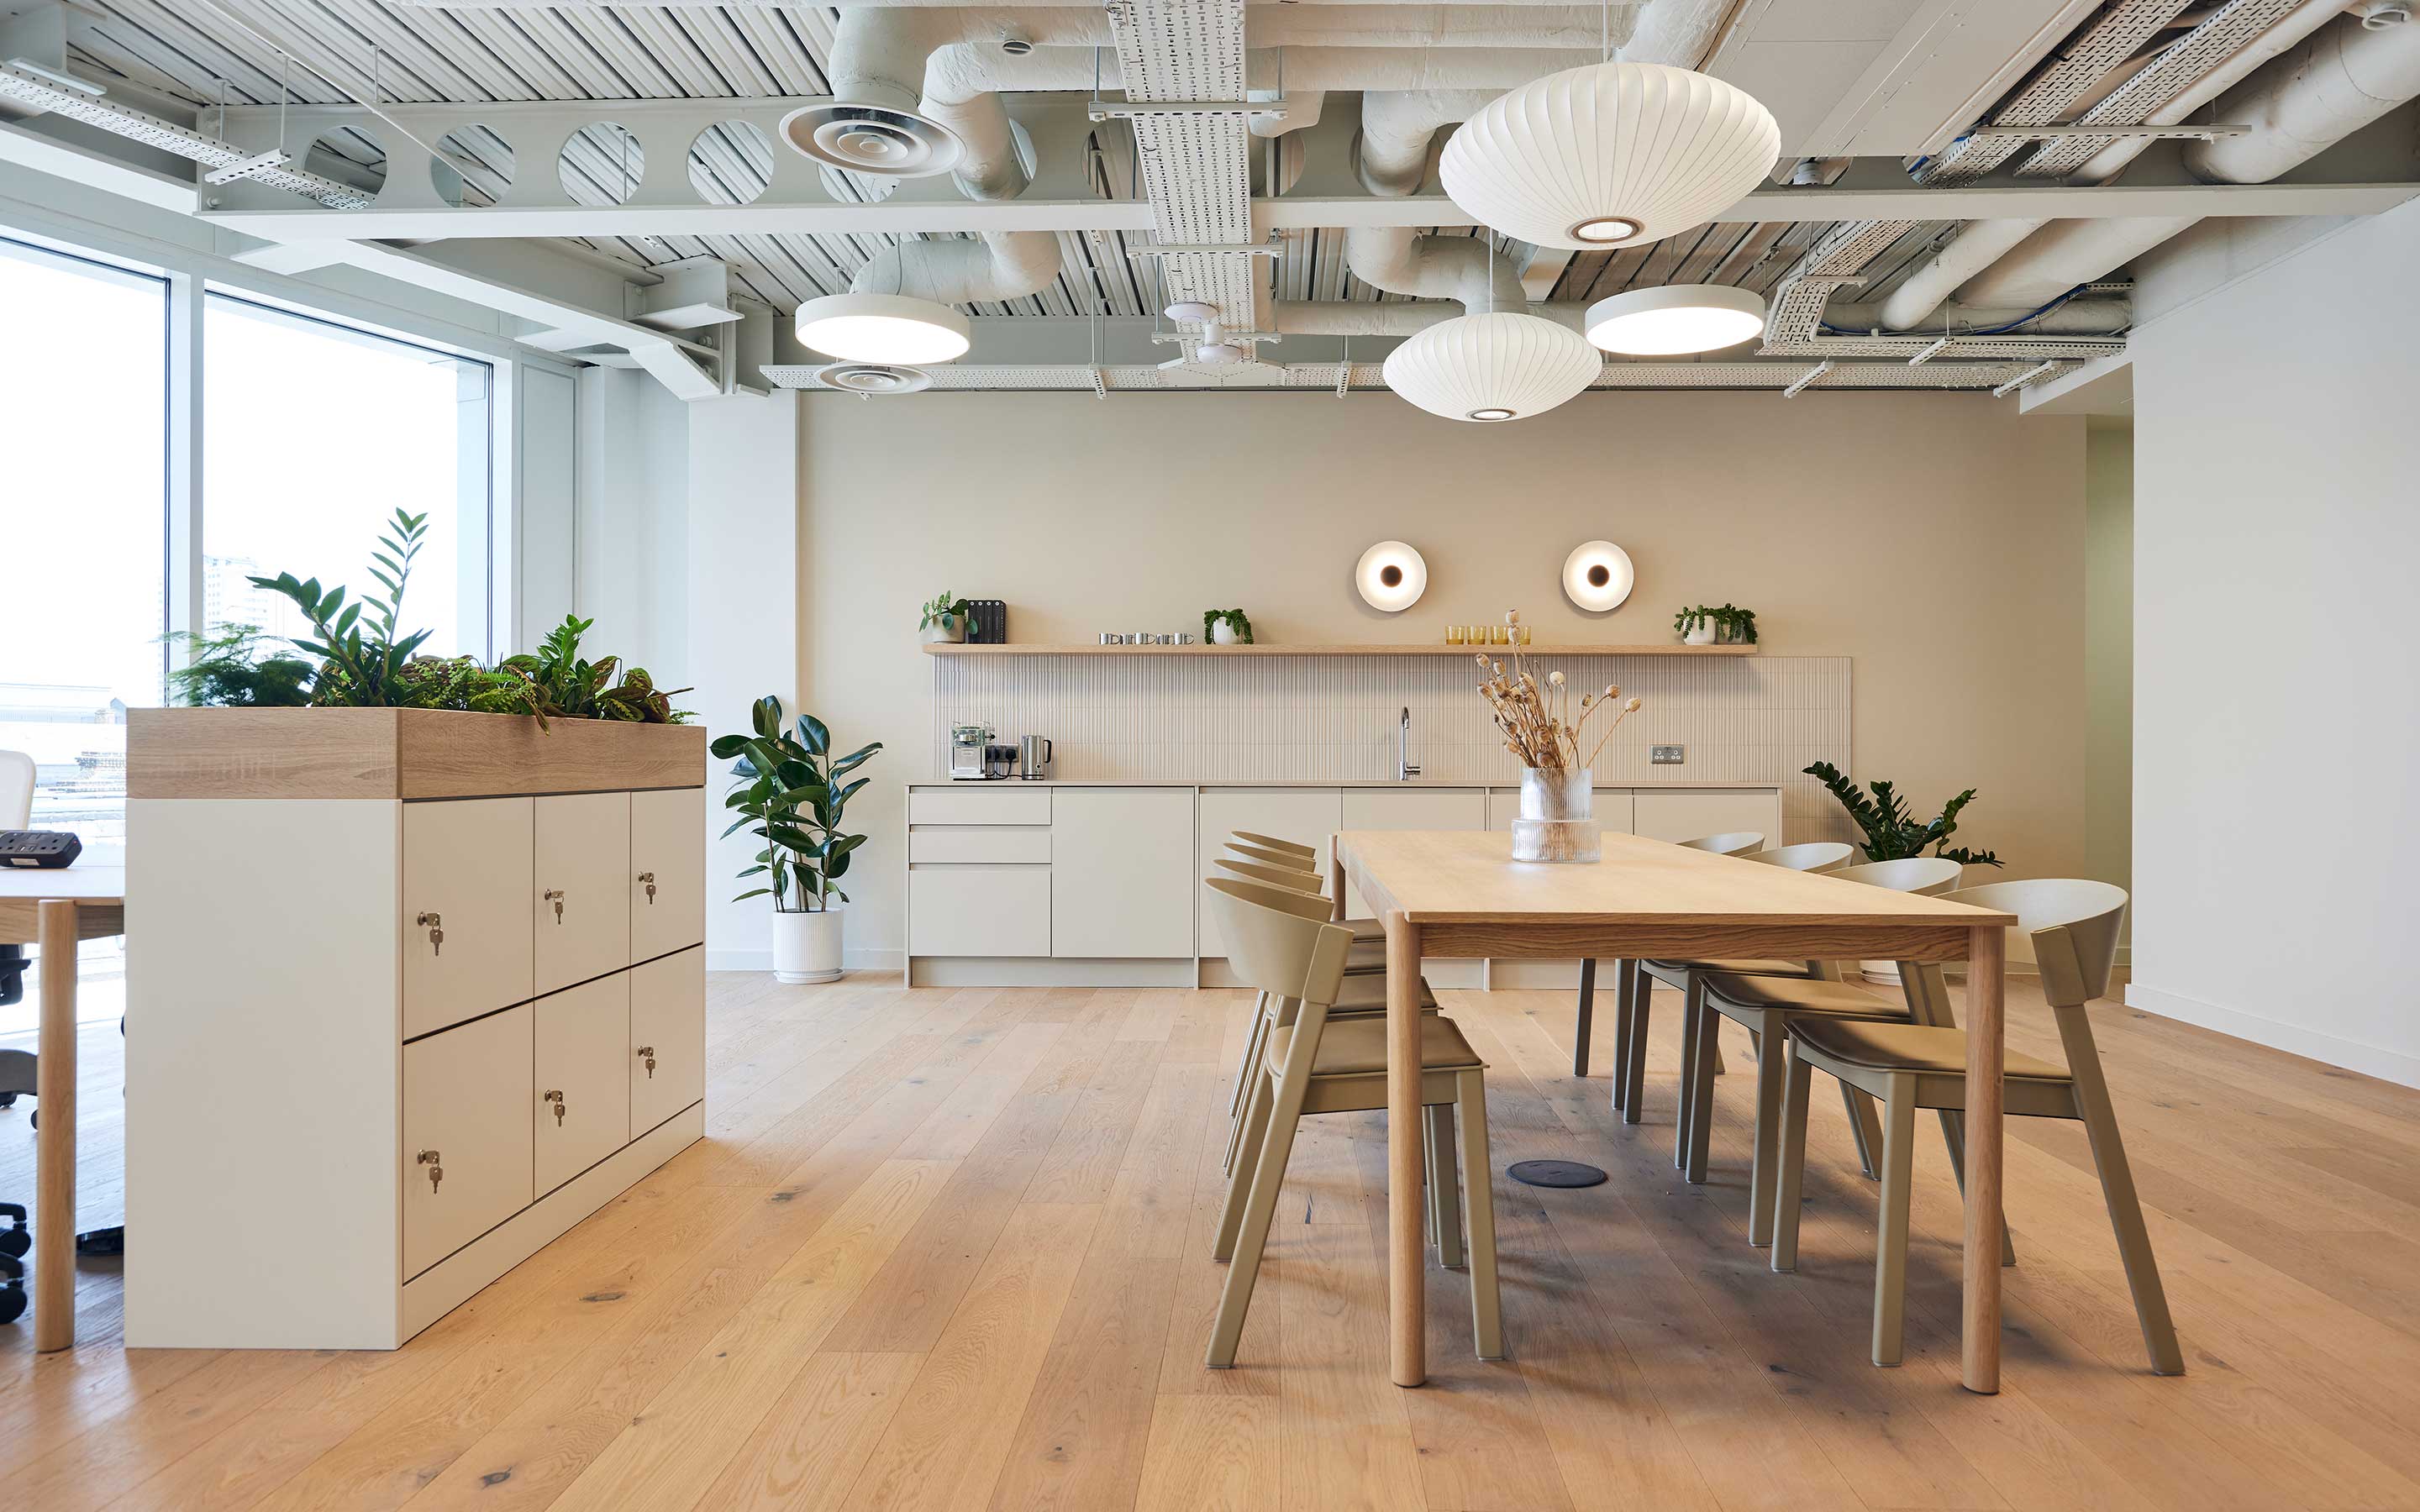 A modern office kitchen area complete with natural wood materials, light finishes and a calming atmosphere